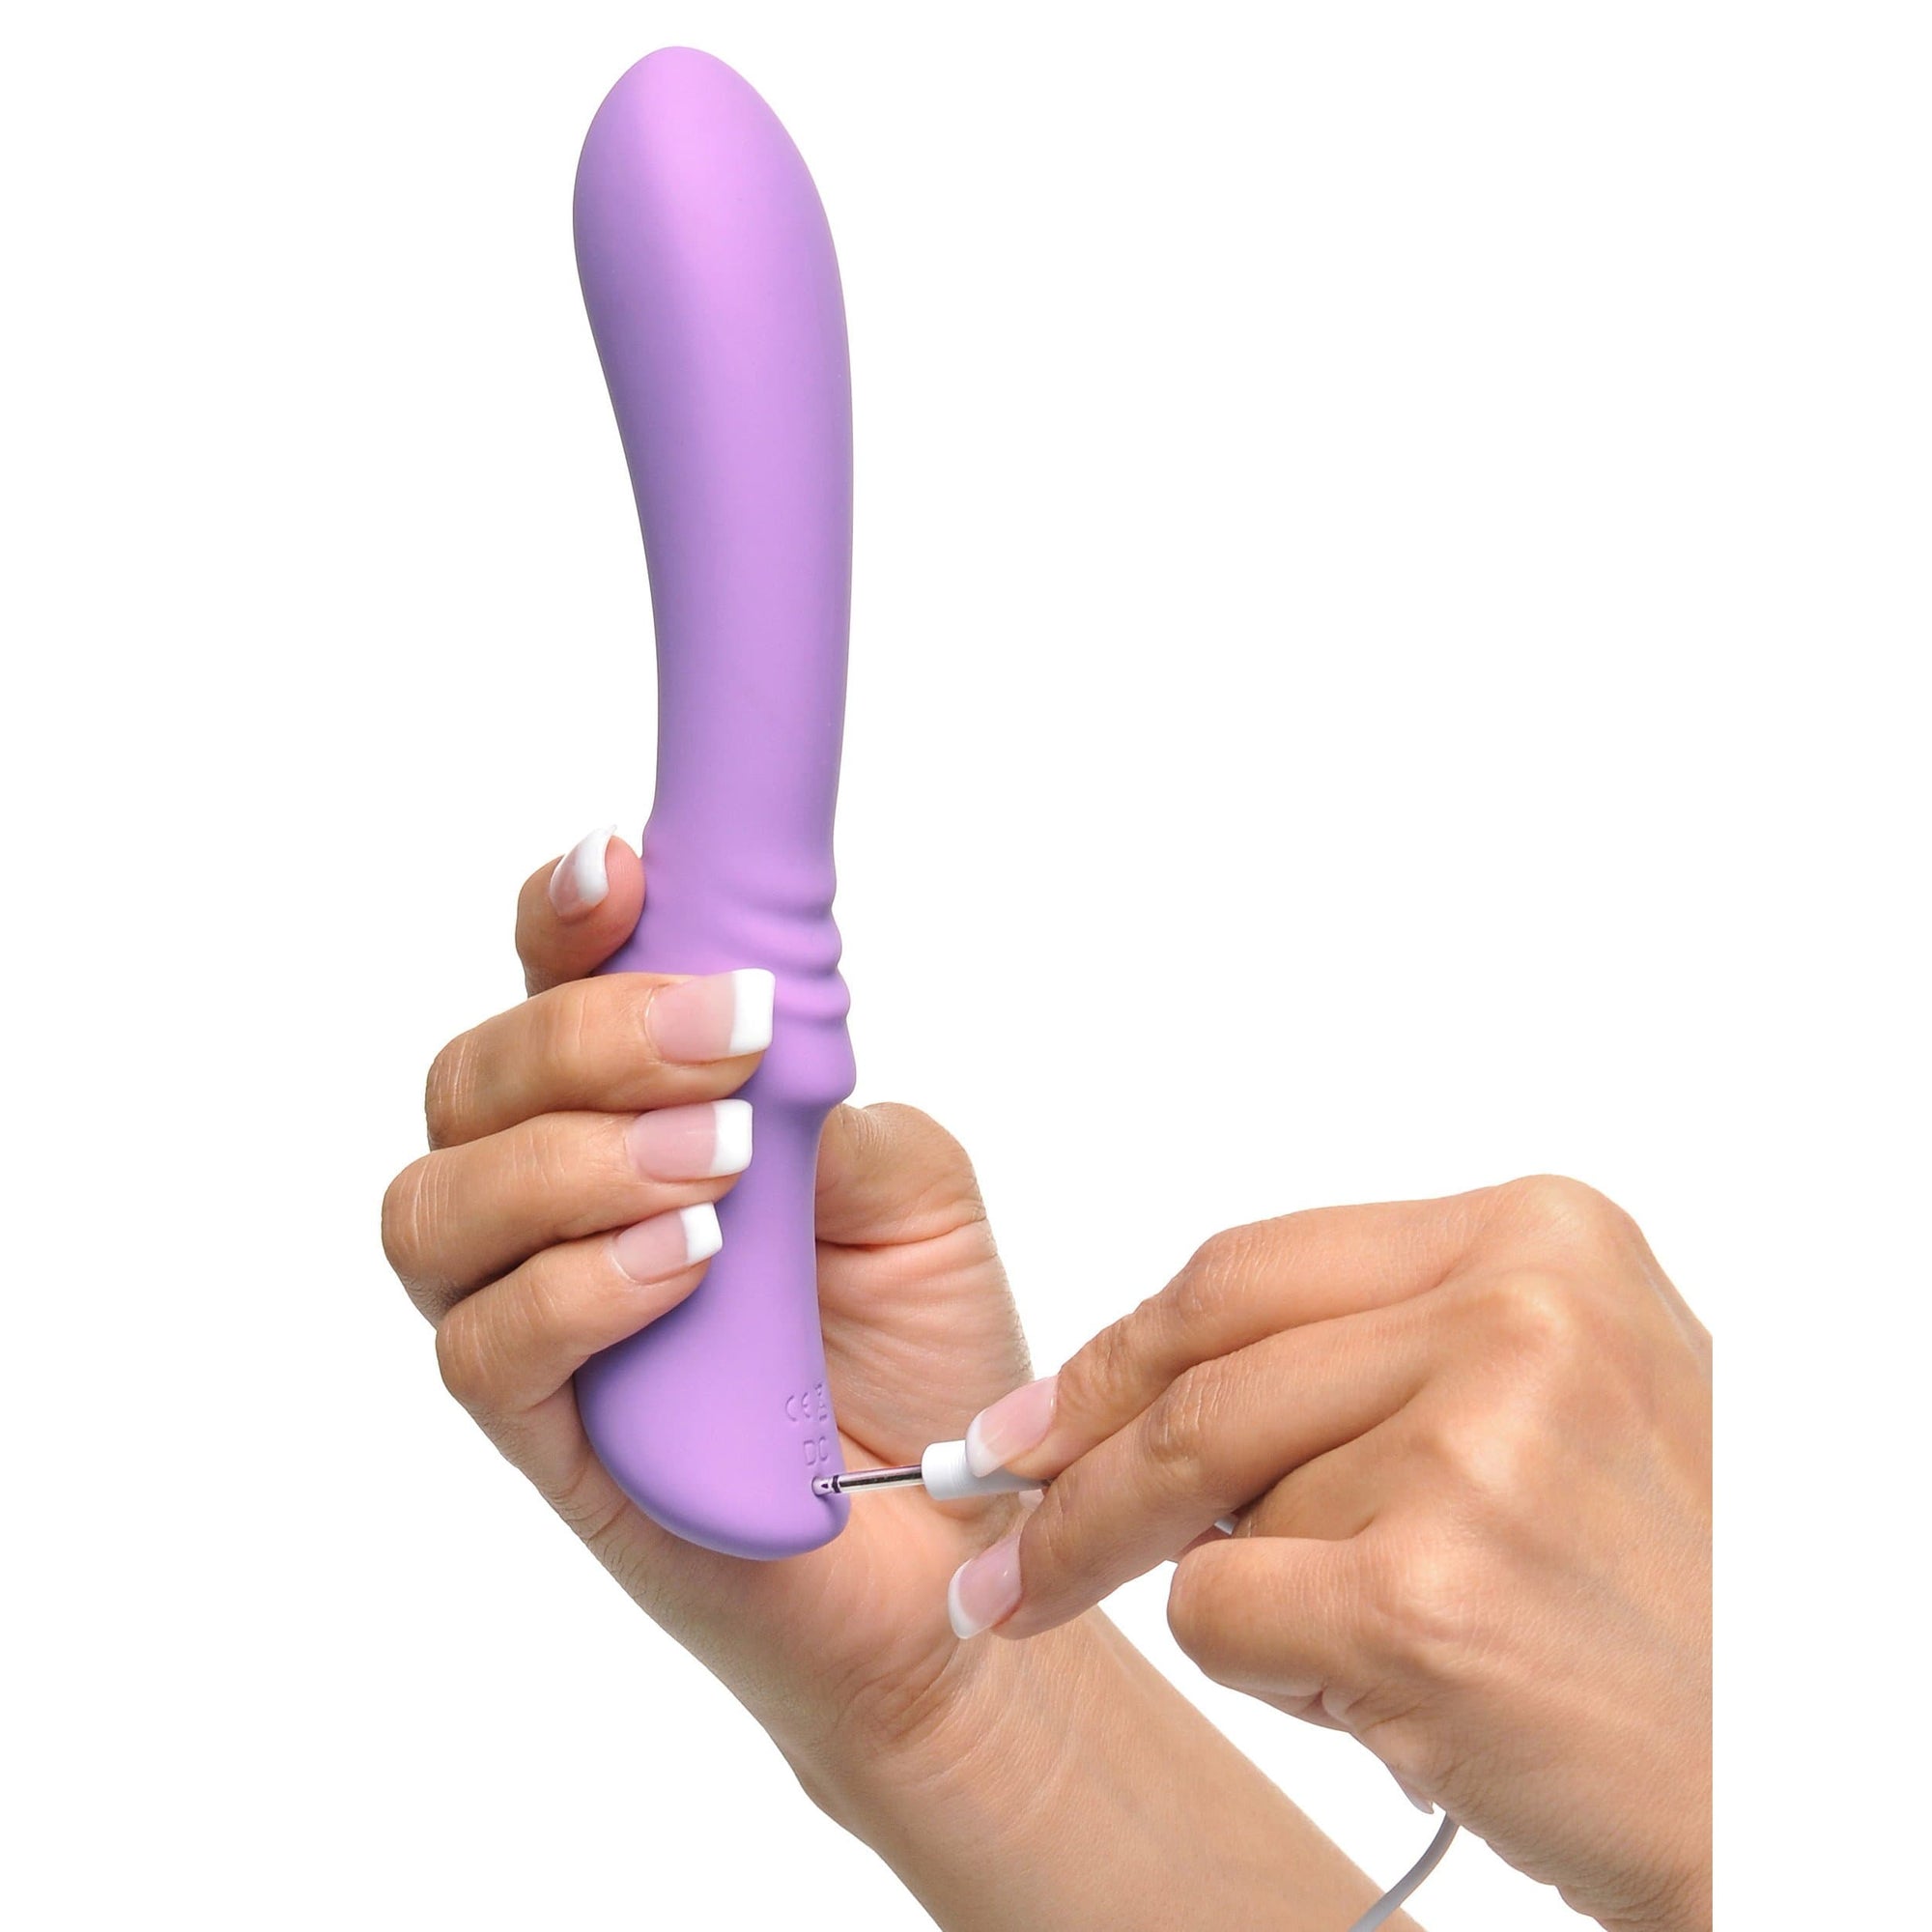 Pipedream - Fantasy For Her Flexible Please Her Massager (Purple) G Spot Dildo (Vibration) Rechargeable 603912755732 CherryAffairs